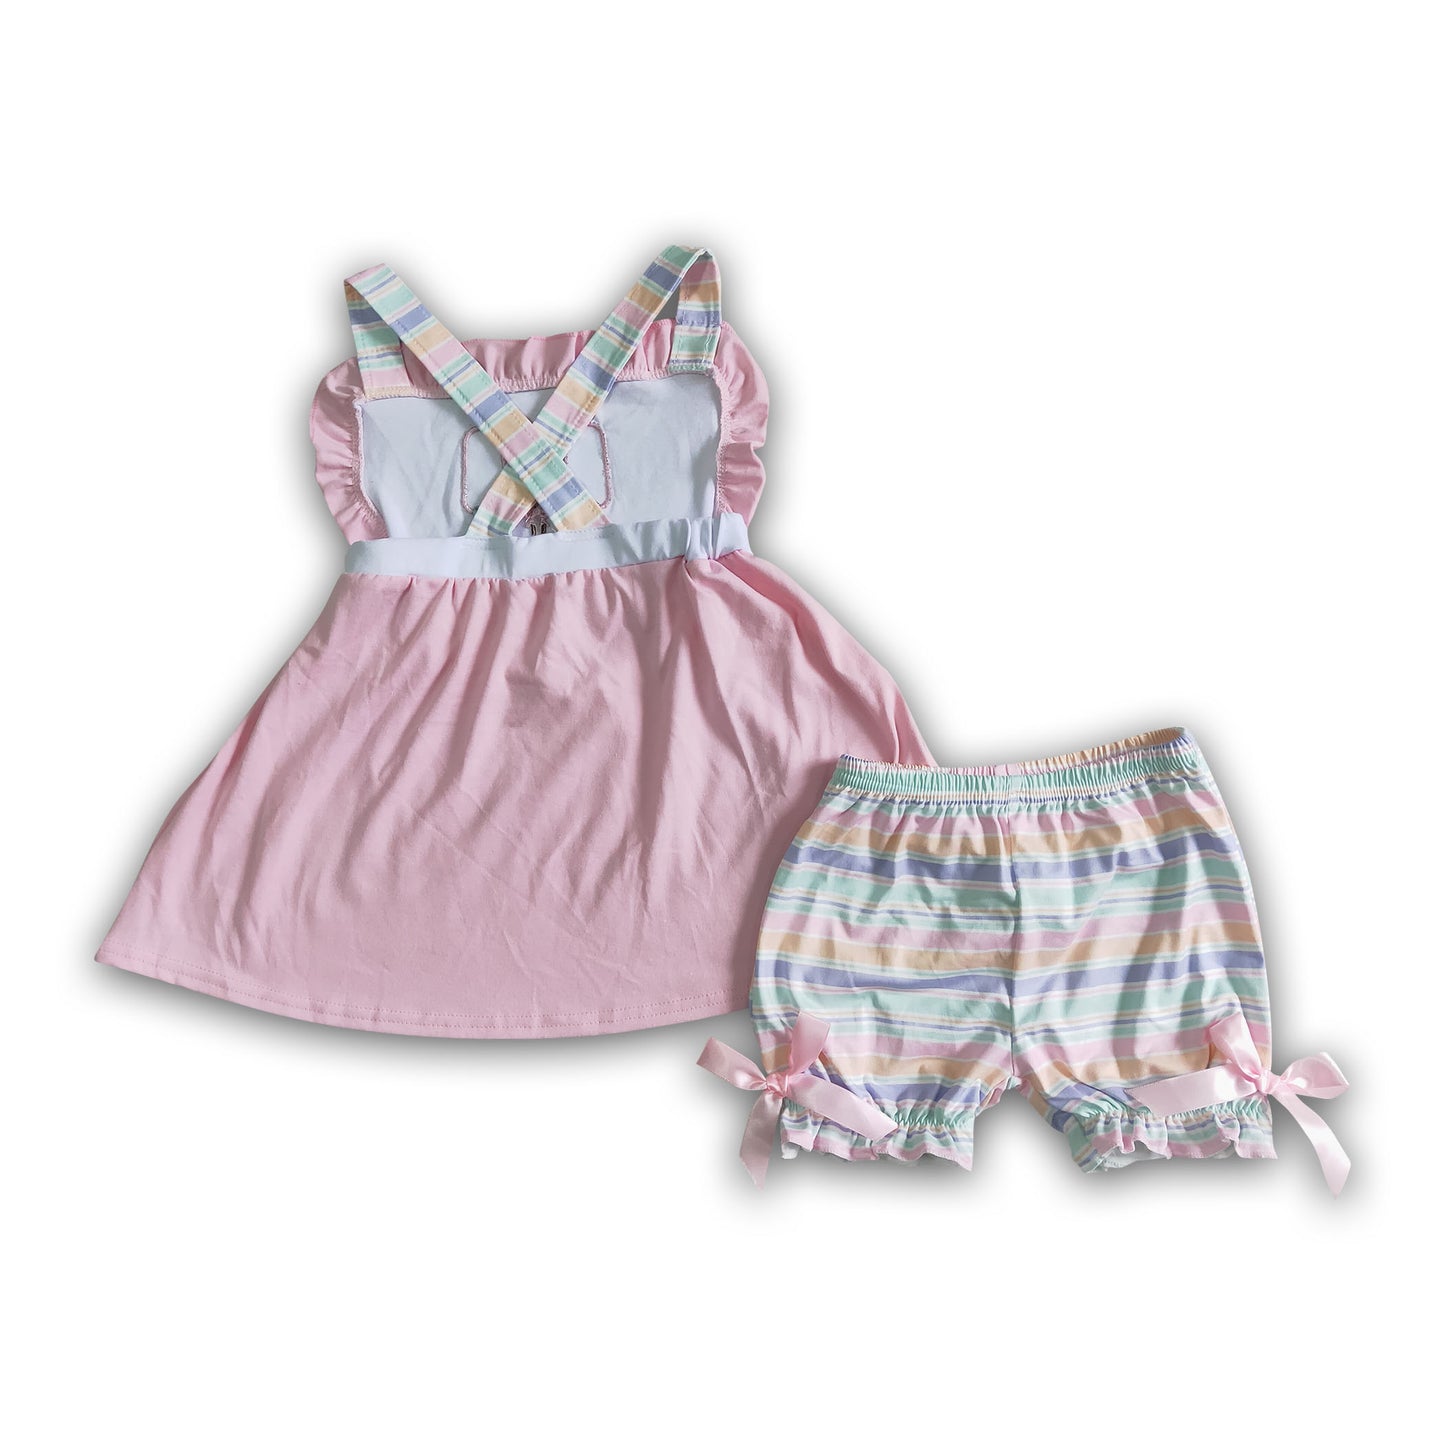 Popsicle embroidery stripe shorts girls summer clothes